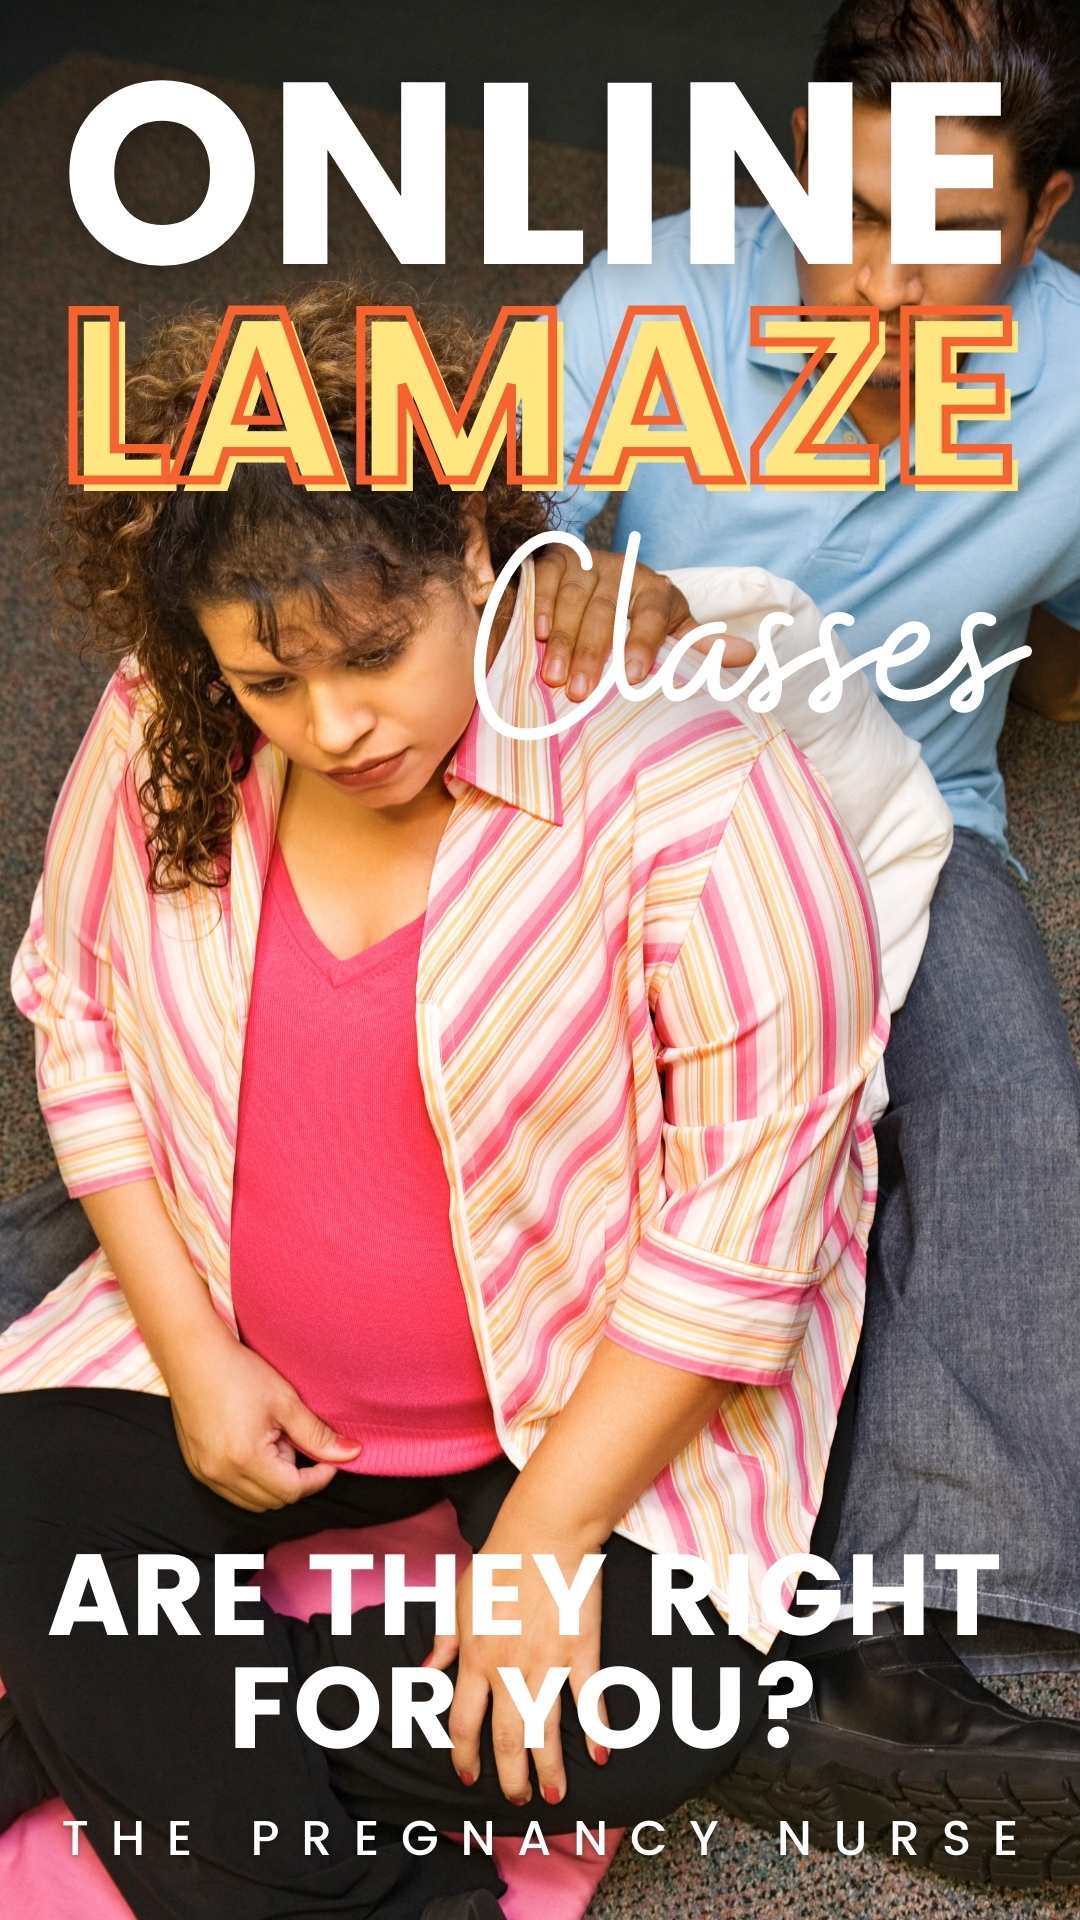 Are you looking for a way to have a calm and confident birth? Check out online Lamaze classes! These classes offer the flexibility to learn at your own pace and from the comfort of your own home. Plus, many online Lamaze classes are offered at a fraction of the cost of traditional childbirth education classes. Ready to sign up?